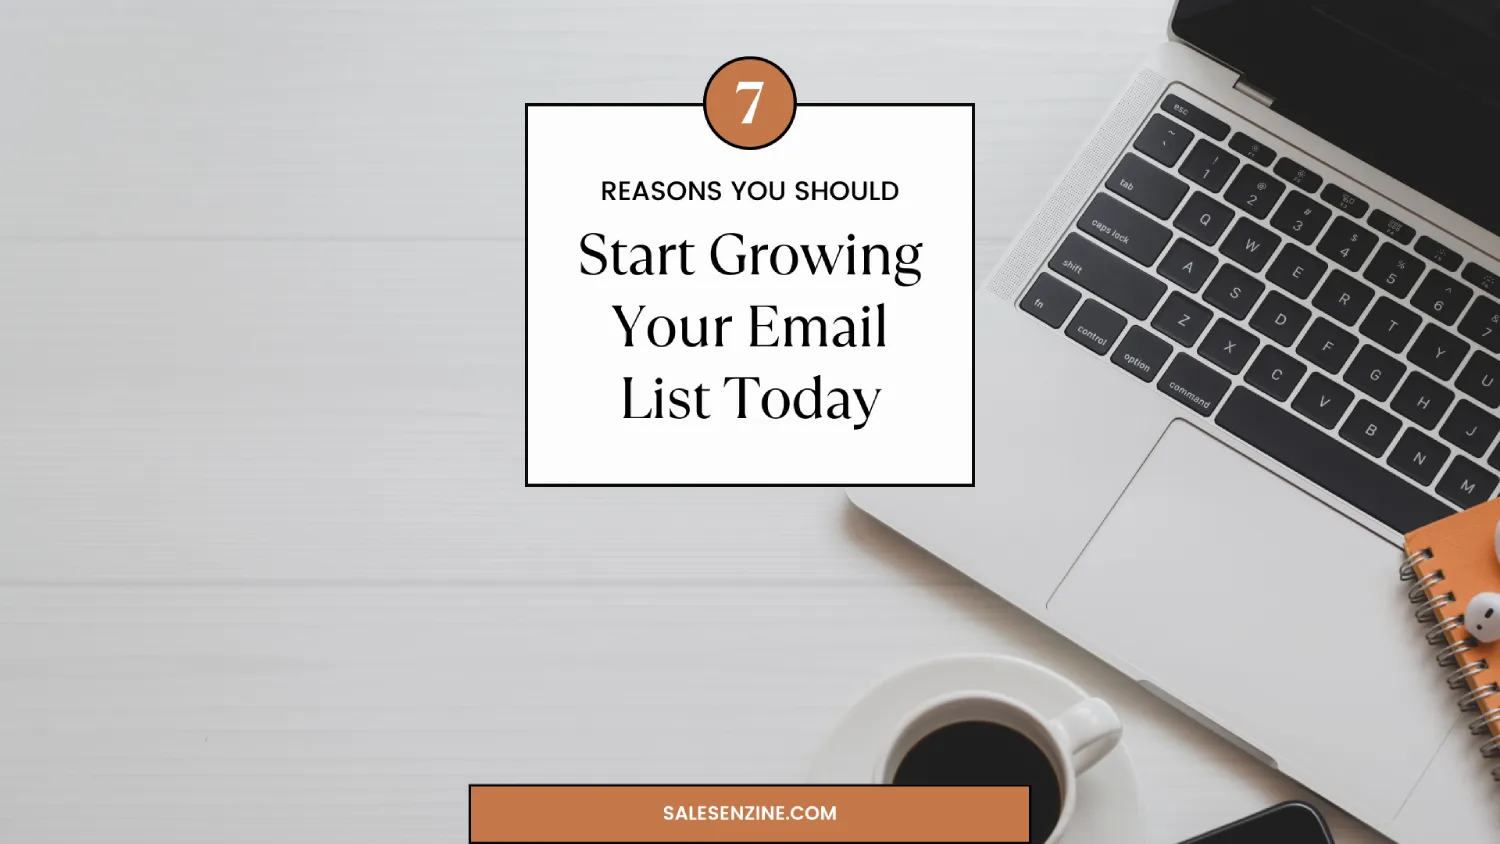 7 Reasons You Should Start Growing Your Email List Today